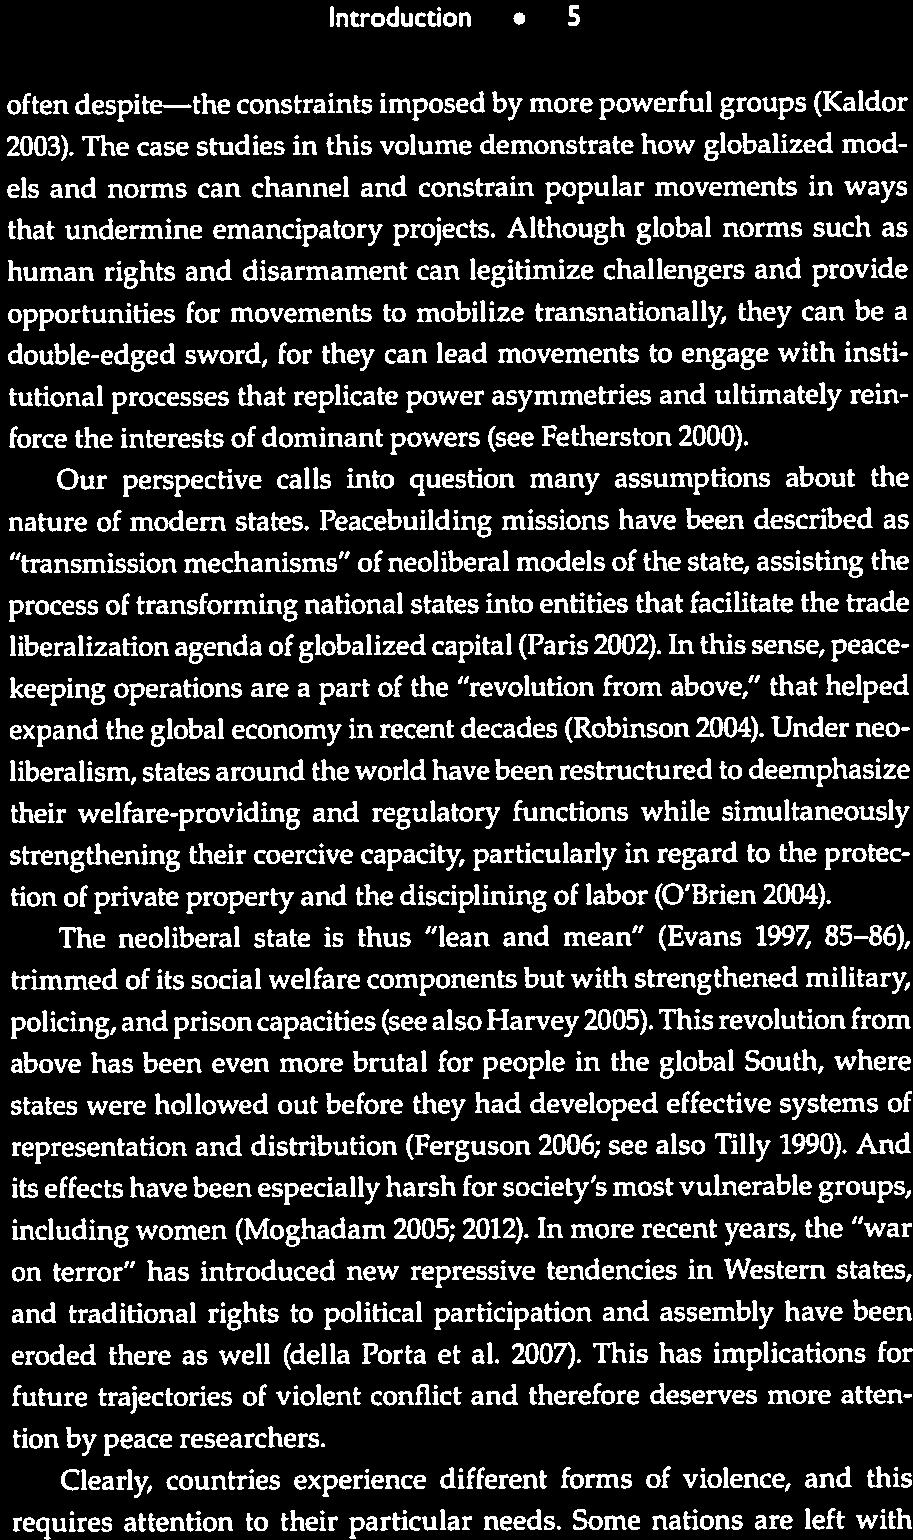 F 4 Globalization, Social Movements, and Peacebuilding e.g., Snow, Soule, and Kiesi 2004; Taow 2011; McCathy 1997; Smith and Kutz-Flamenbaum 2010; Smith and Wiest 2012).